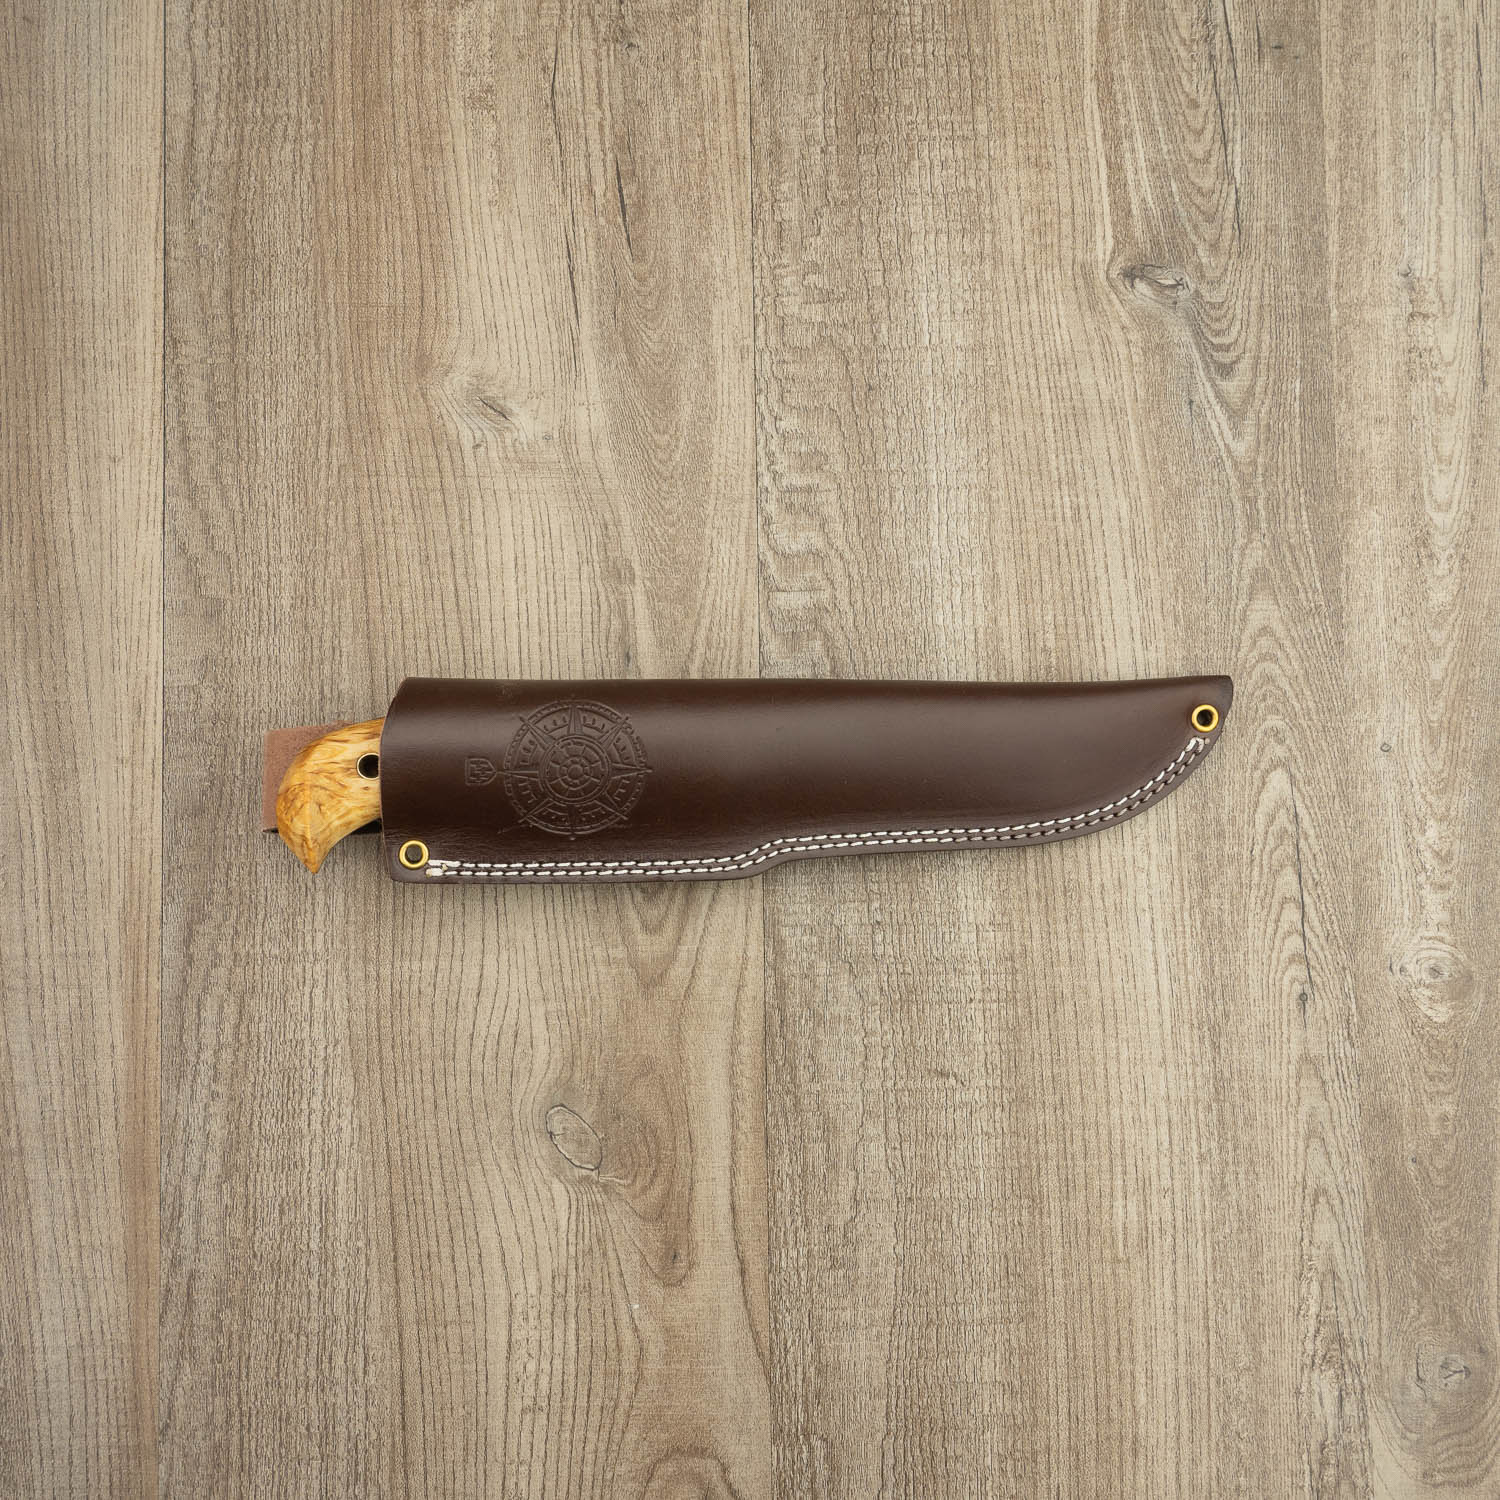 Helle Knives Hellefisk 123mm Fishing and Hunting Knife from Helle